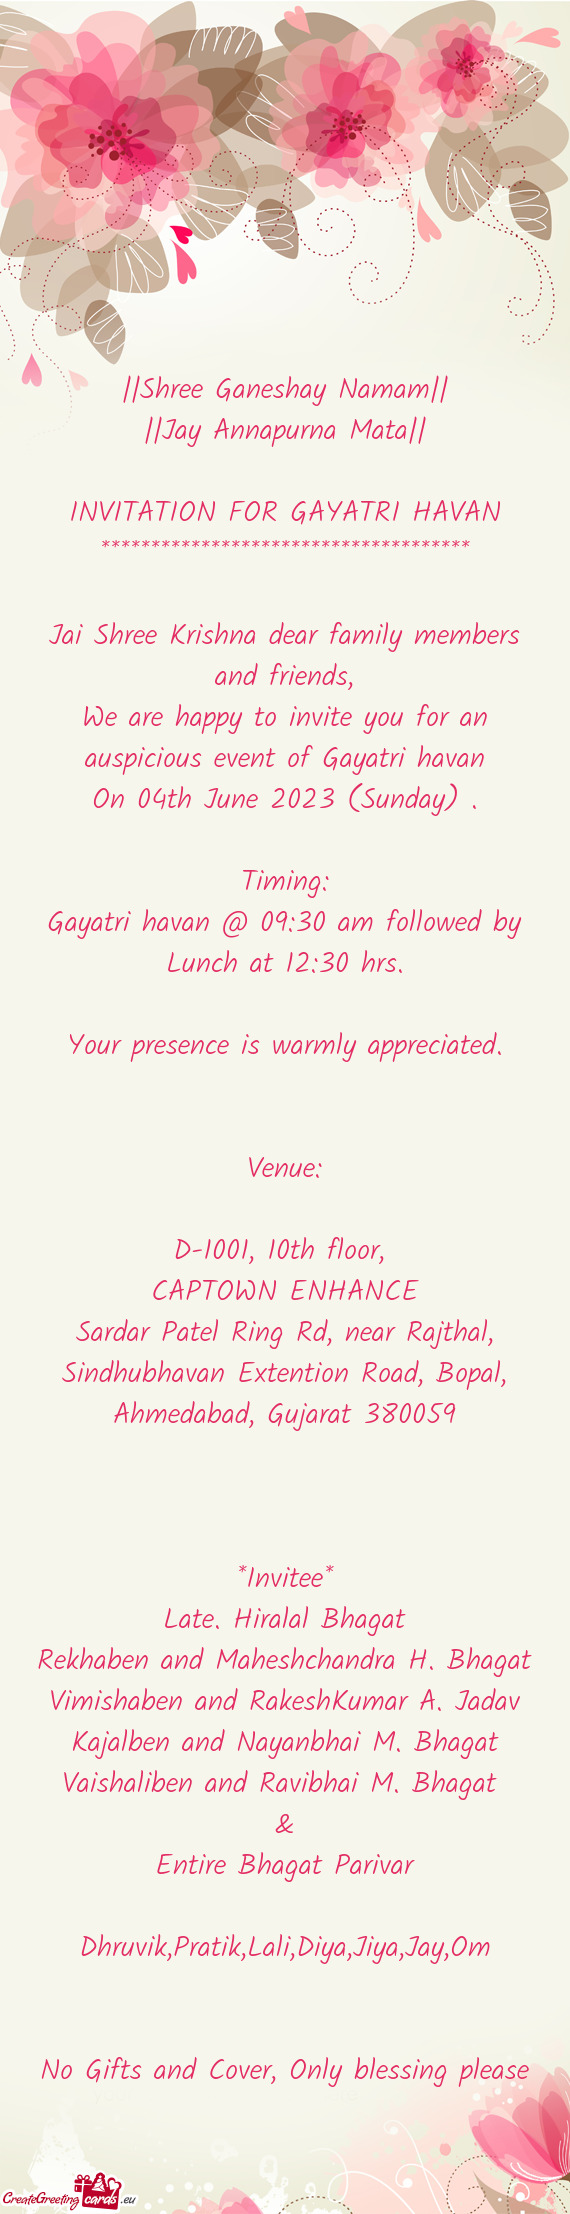 We are happy to invite you for an auspicious event of Gayatri havan